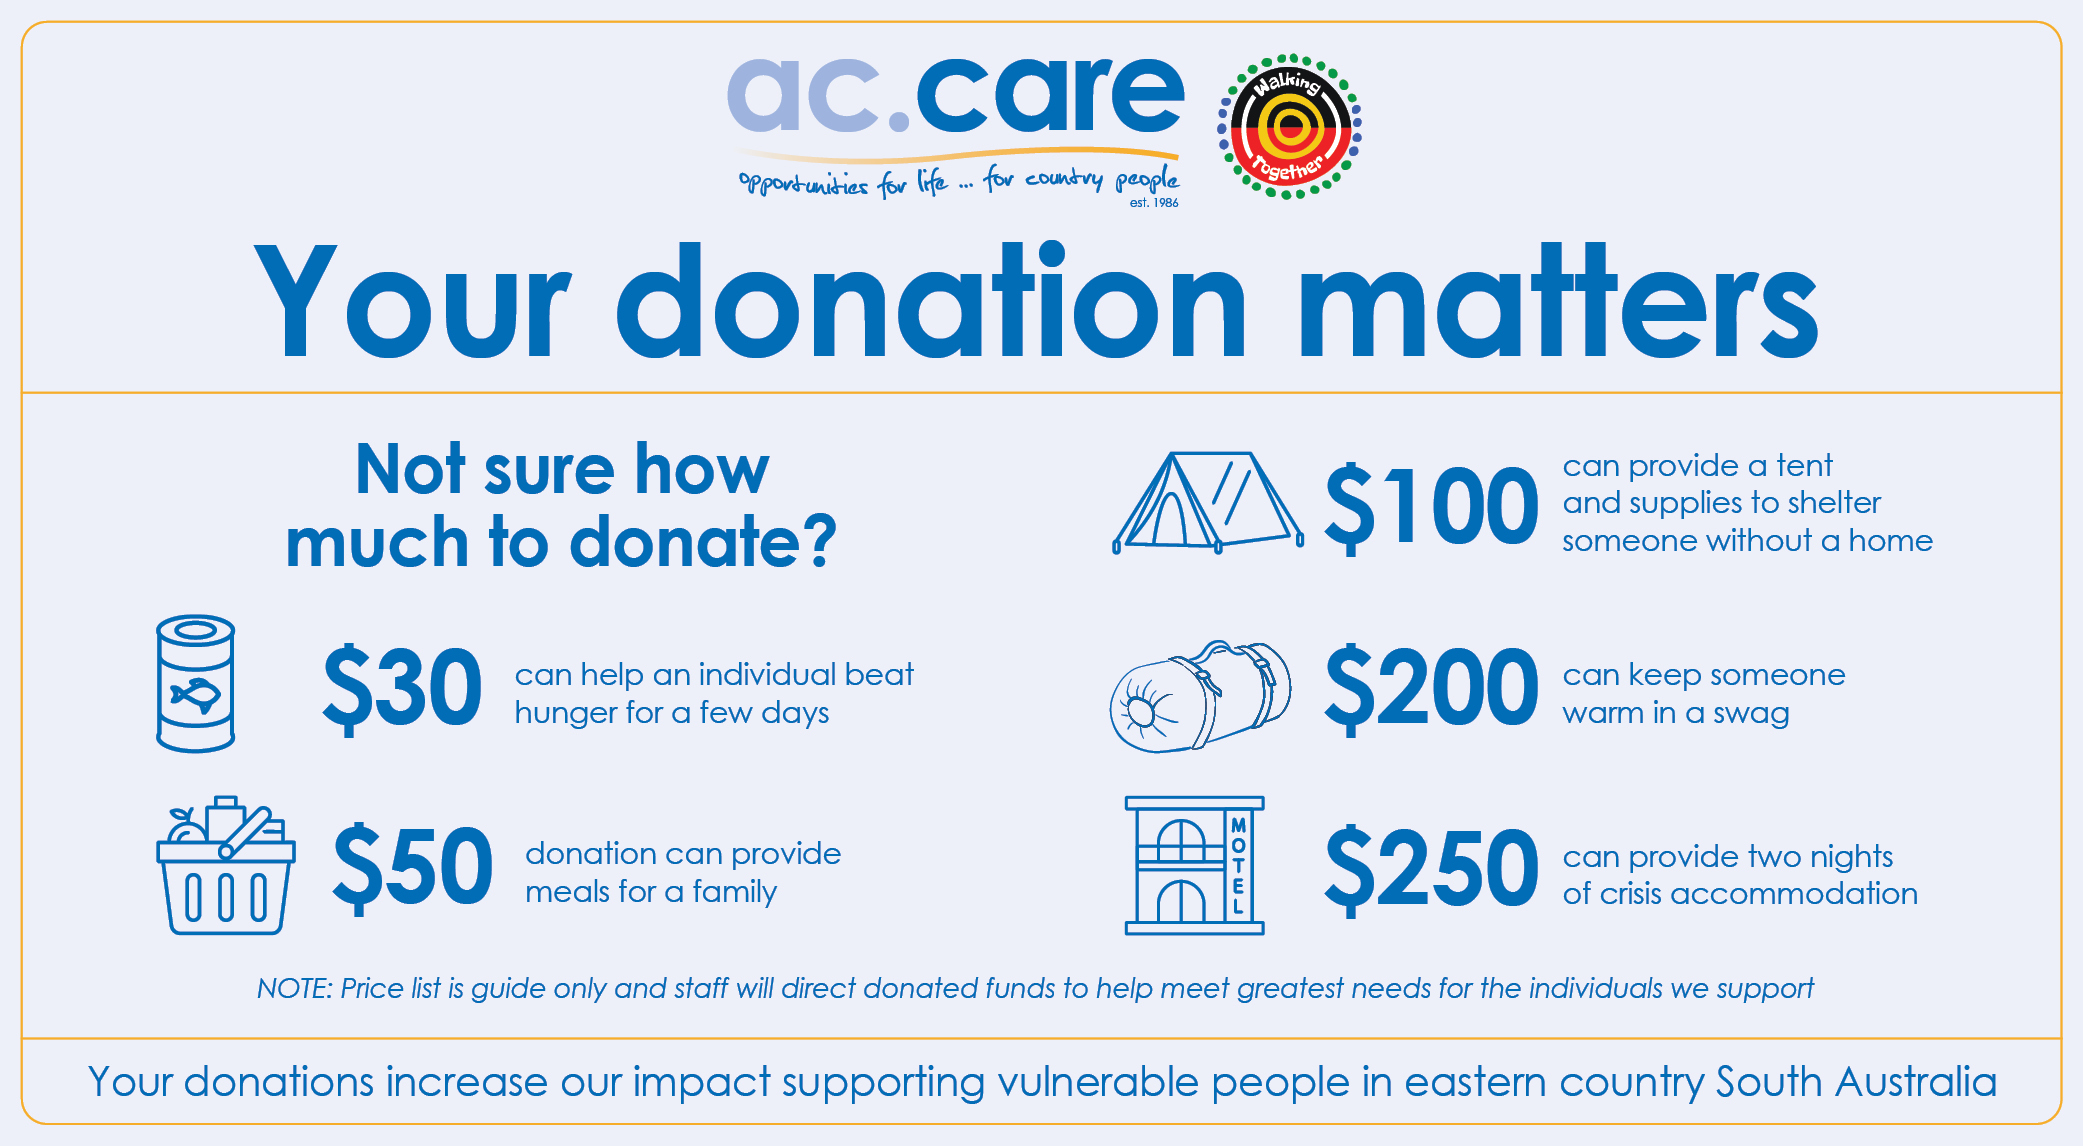 Your donation matters online